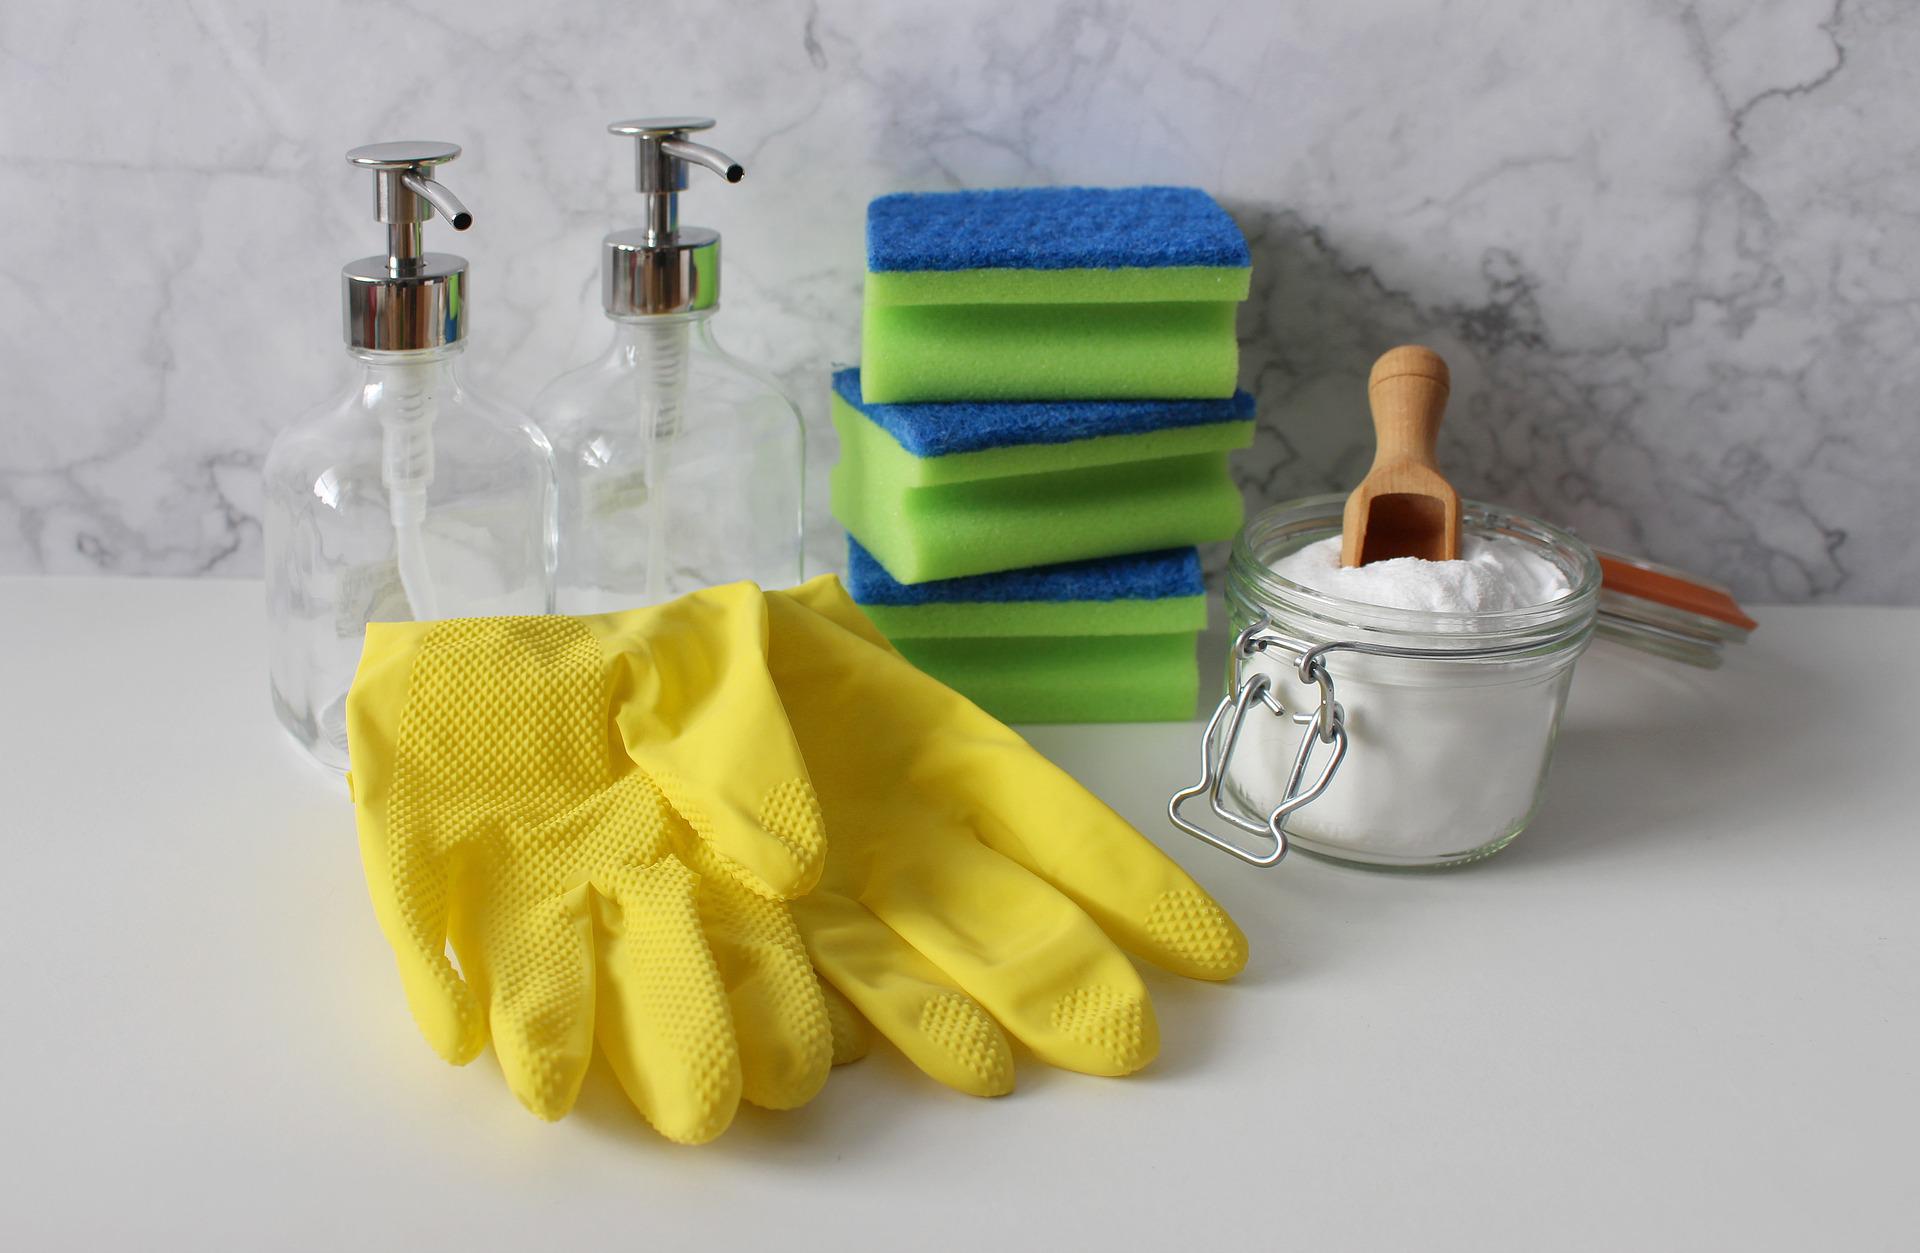 Top 5 Ways to Keep a Shared Kitchen Clean